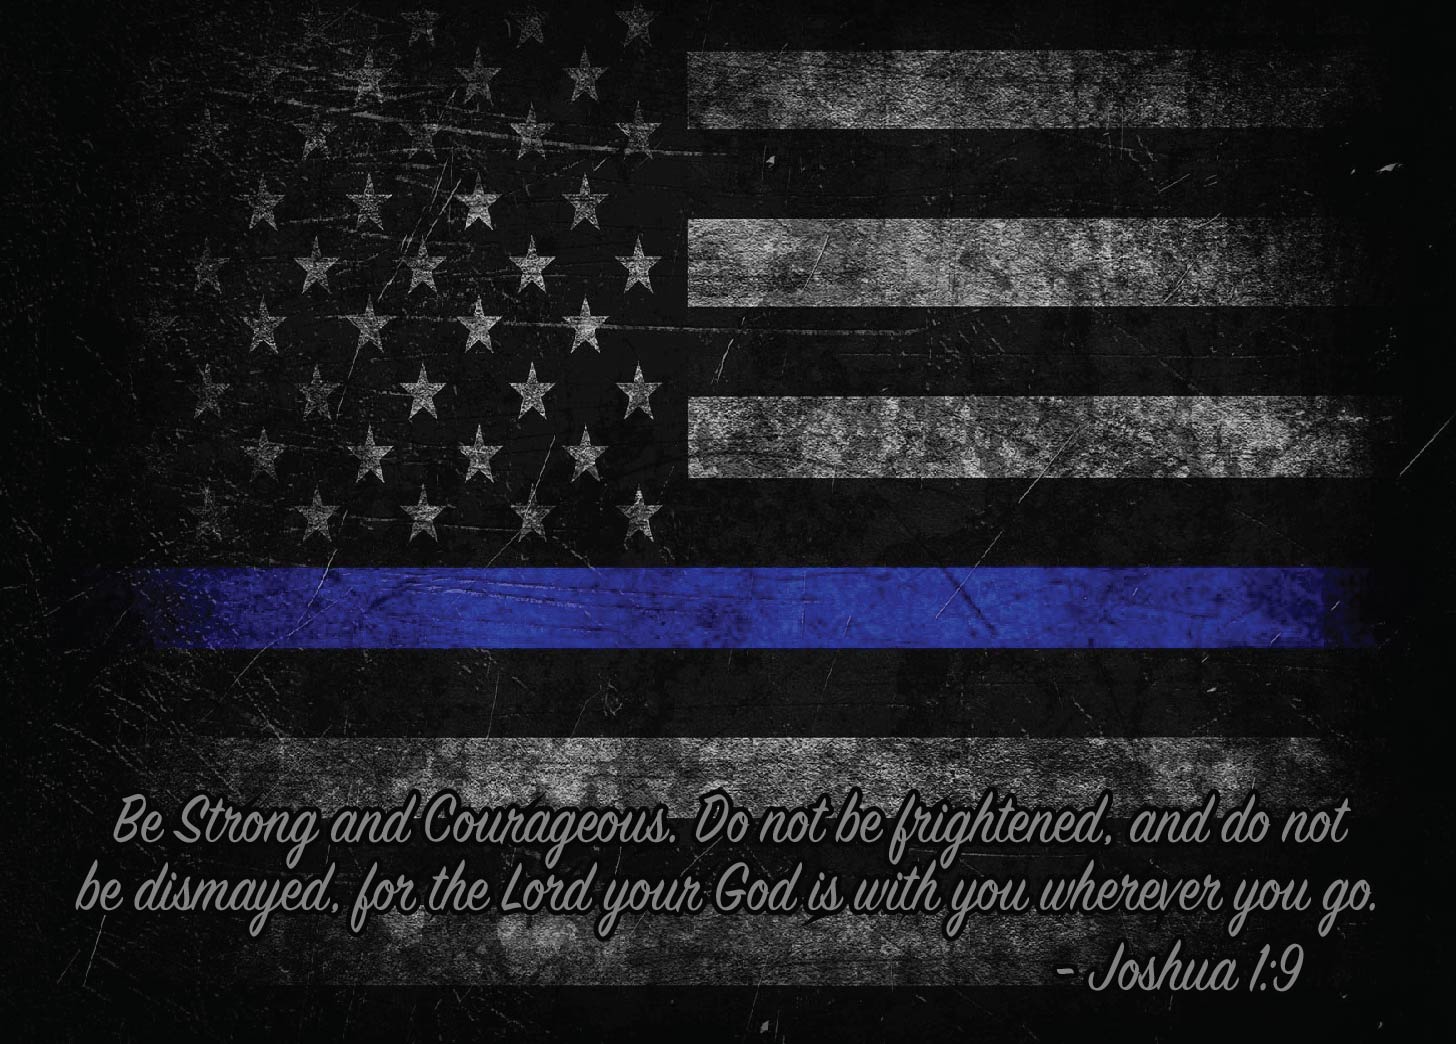 Vinyl Wrap For Lock Box Lid, Antiqued Thin Blue Line Flag With Joshua 1:9  (standard lock box only) - Warrior Rack